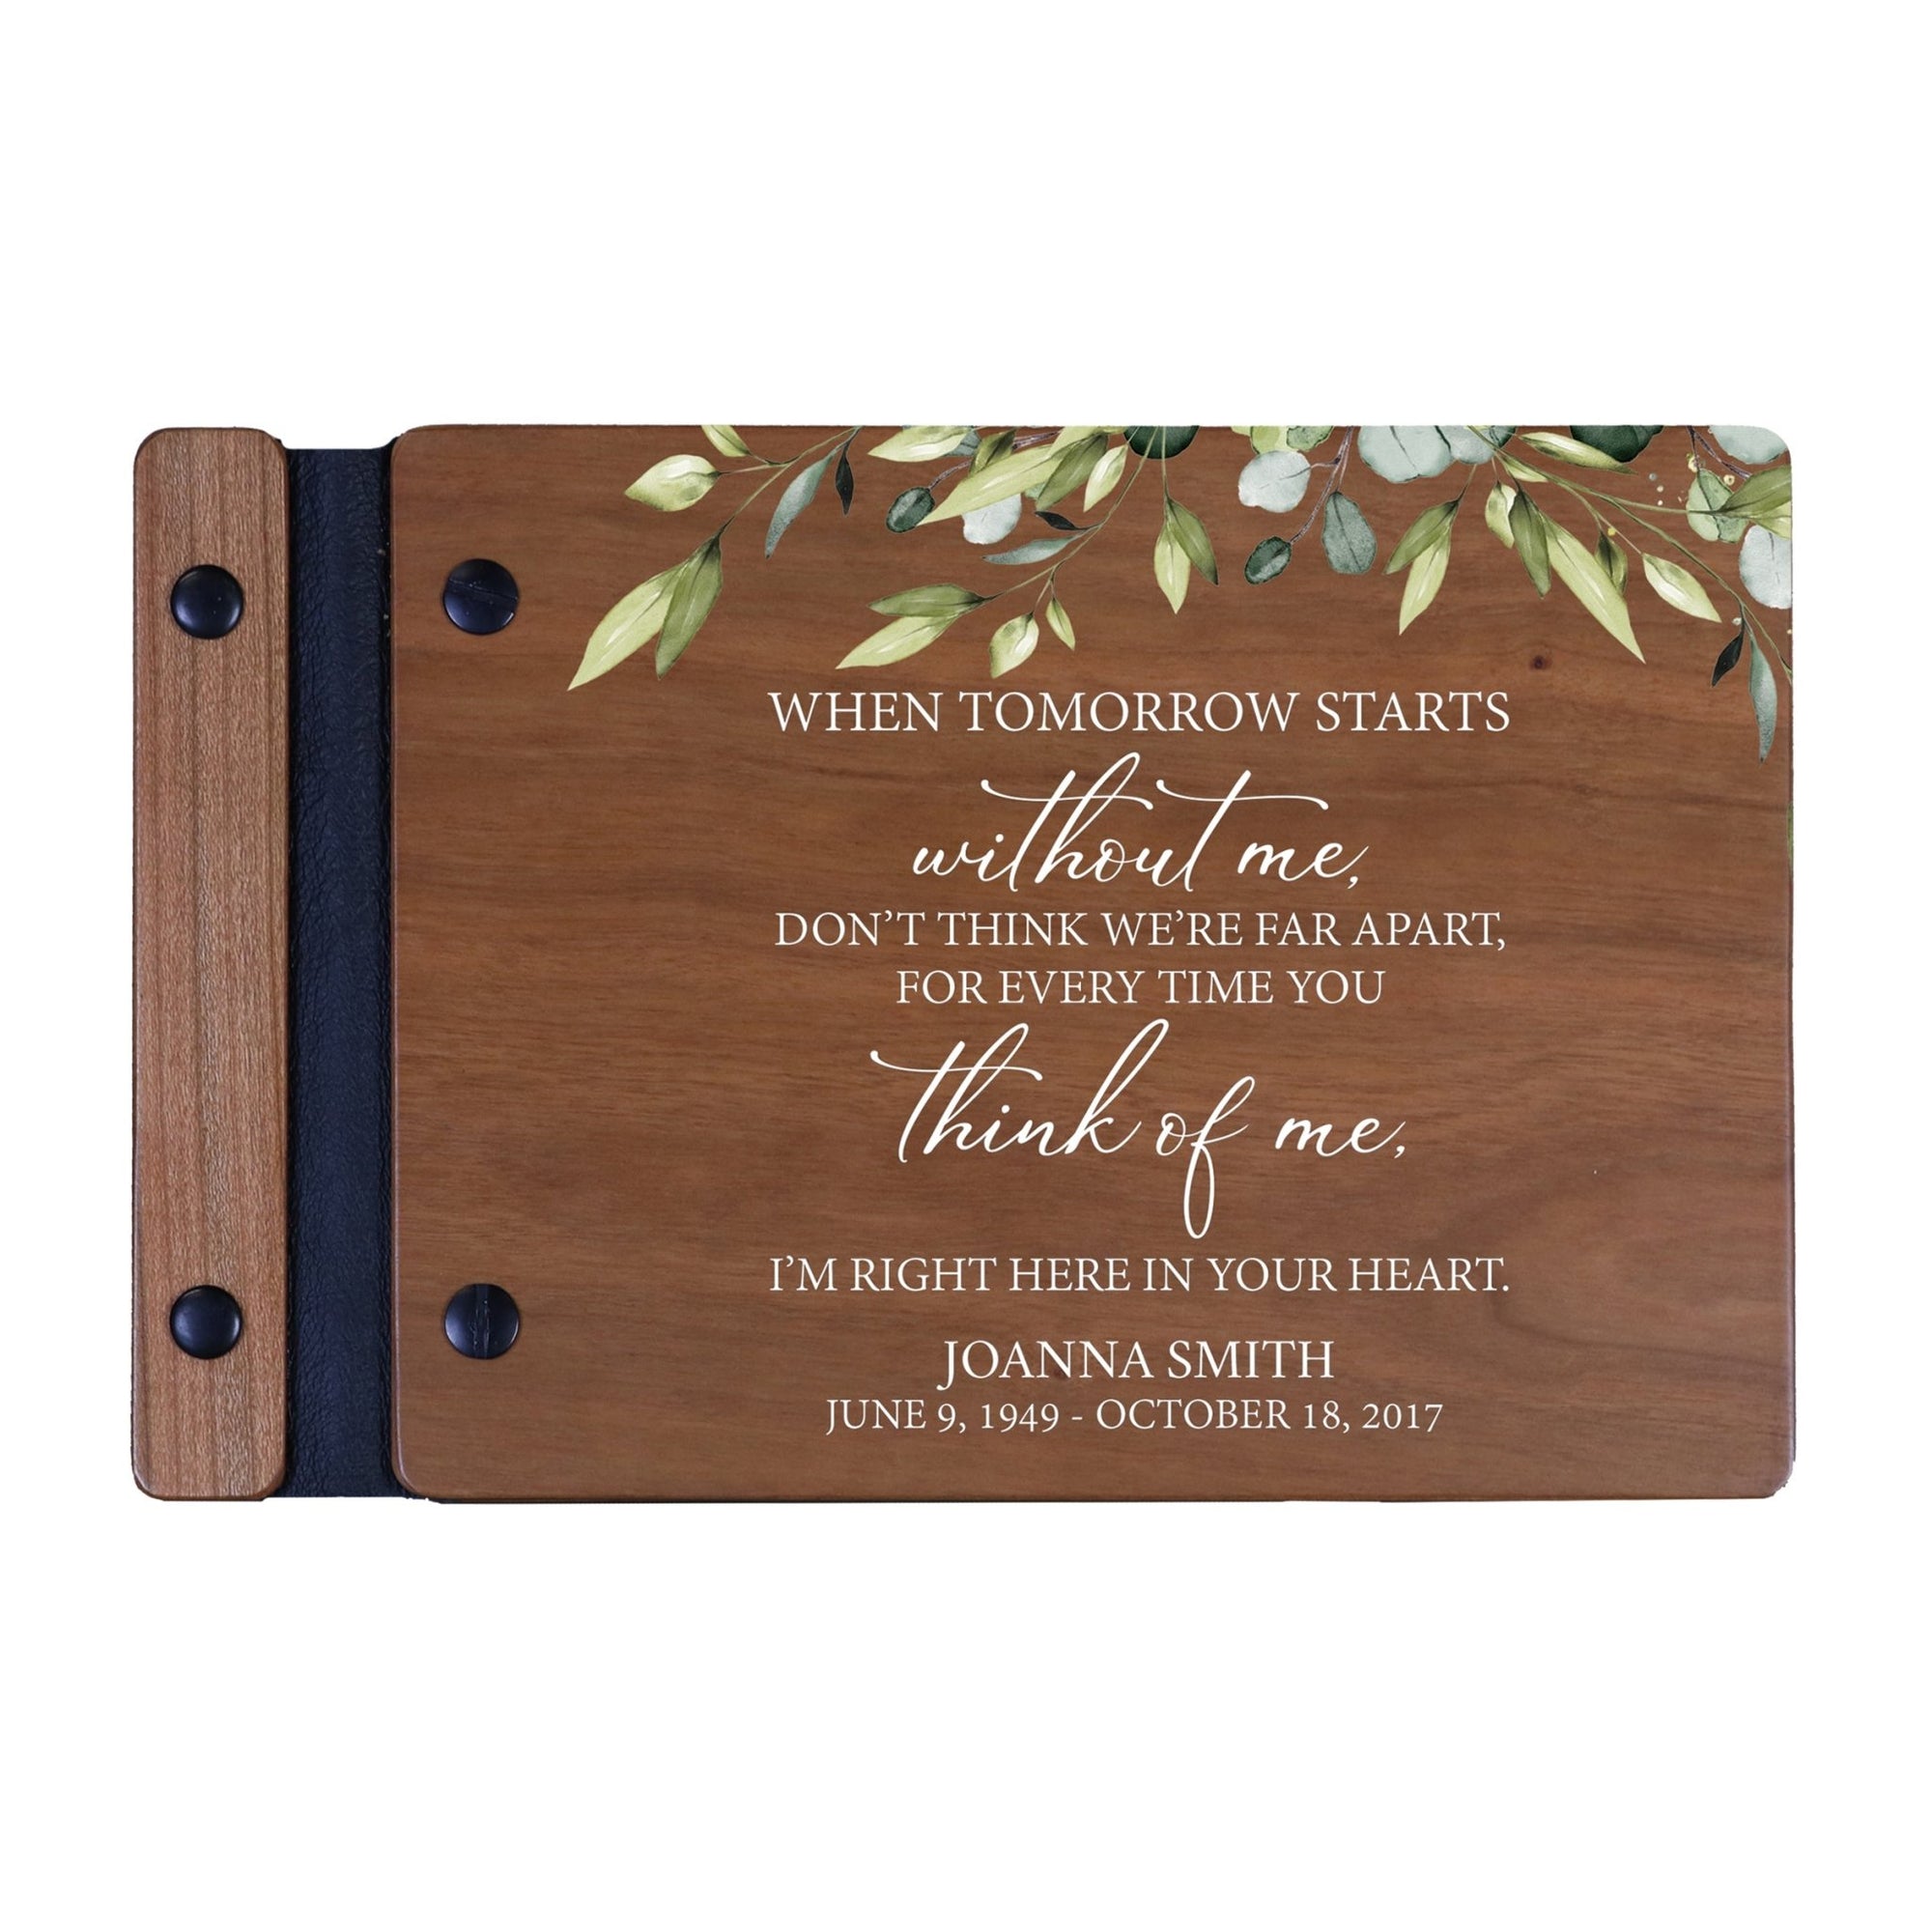 Personalized Small Wooden Memorial Guestbook 9.375x6 - When Tomorrow Starts - LifeSong Milestones